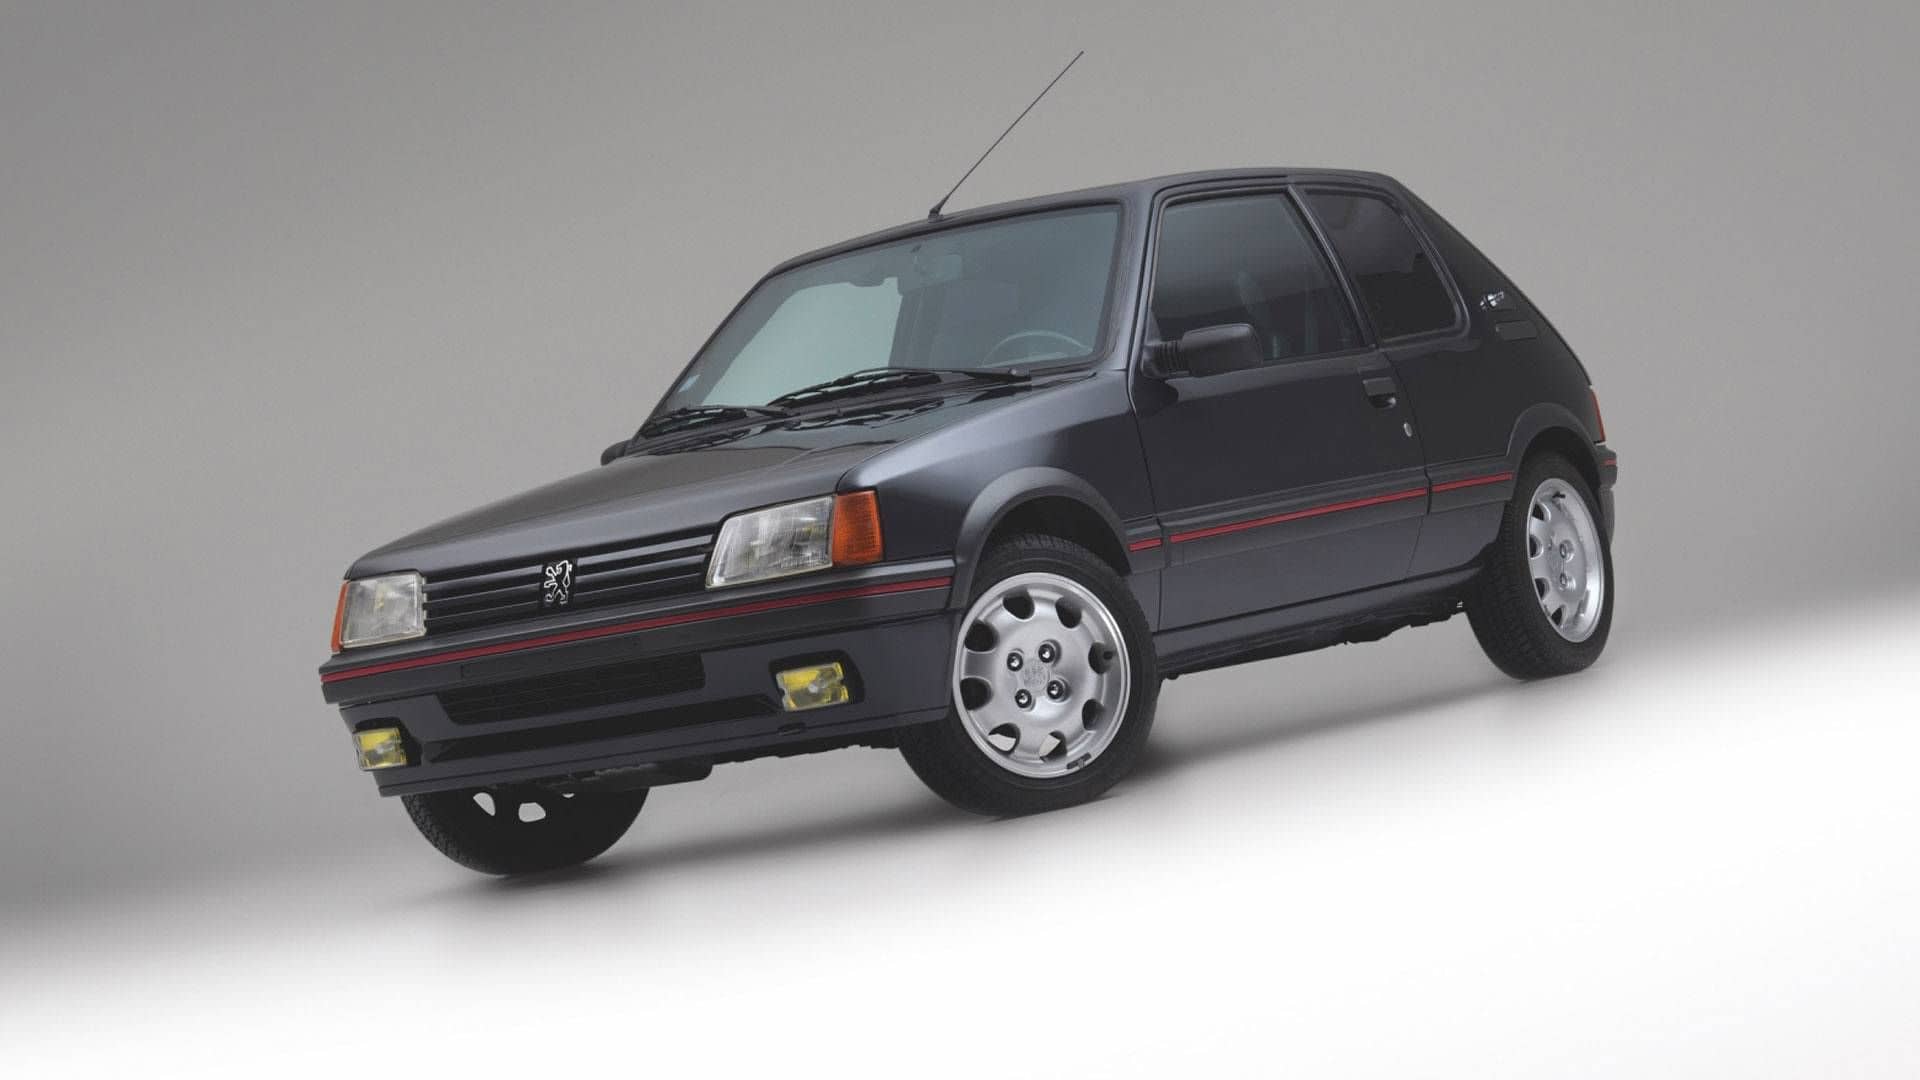 Armored Peugeot 205 GTI